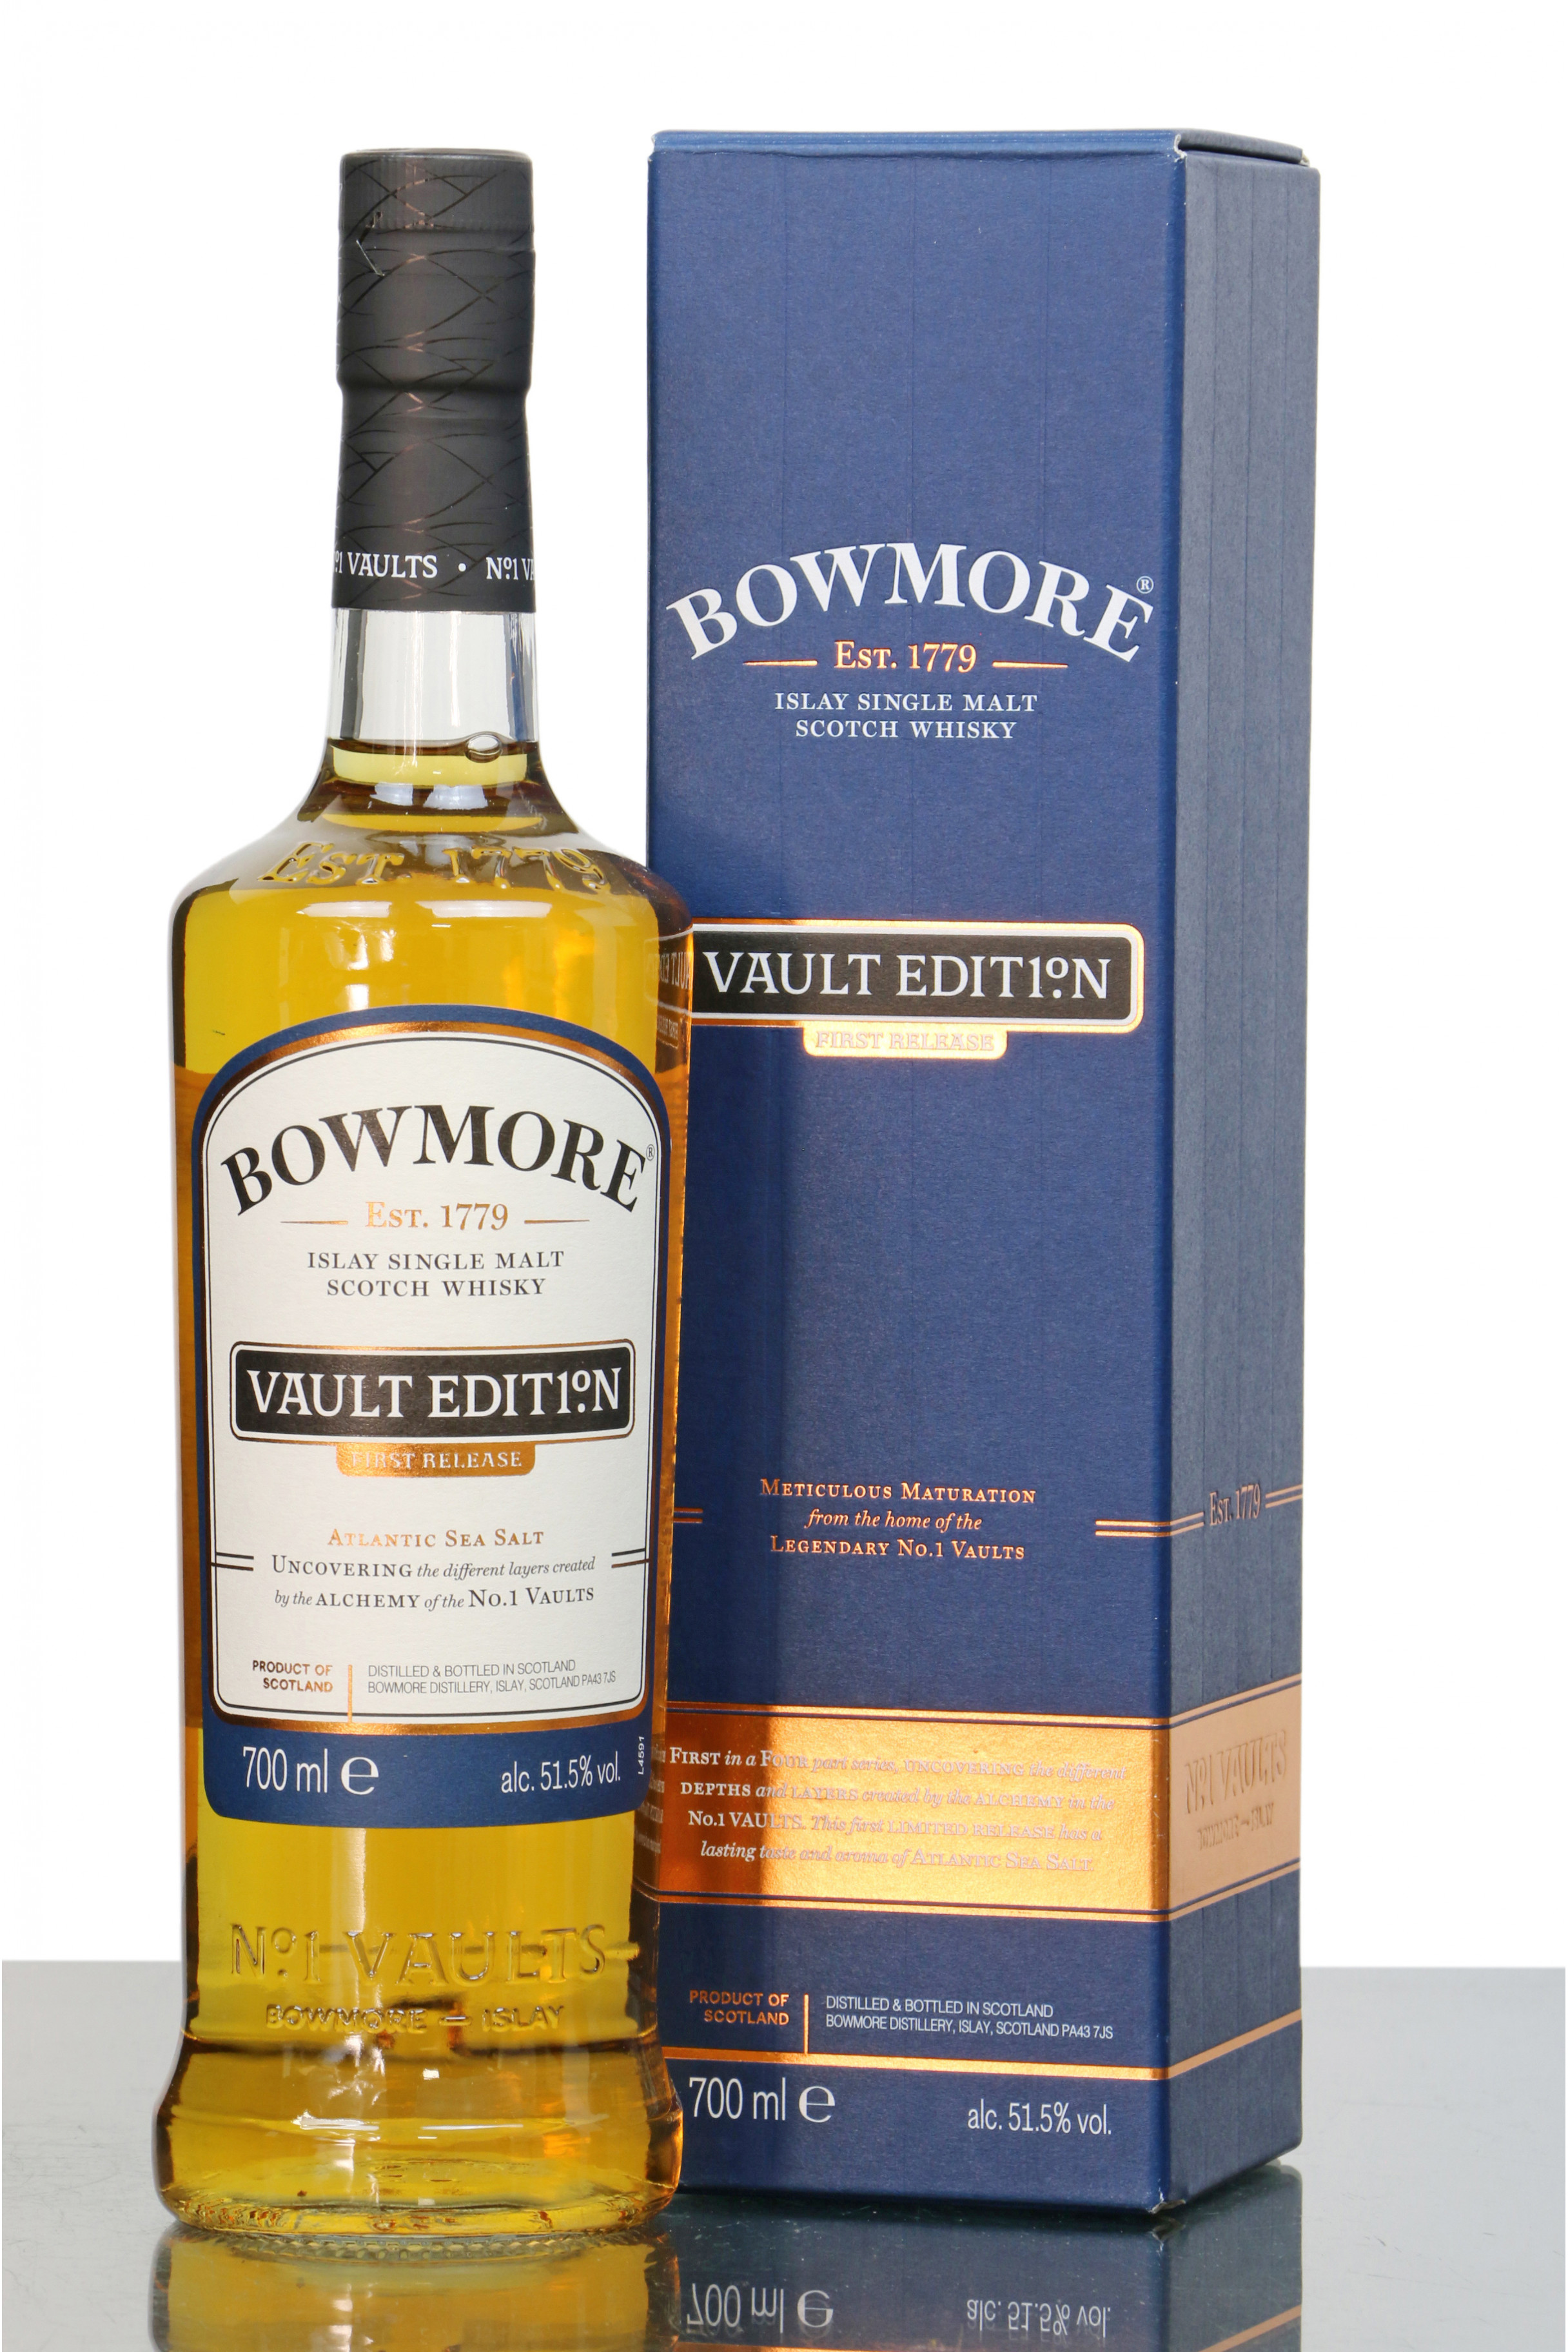 Bowmore Vault Edition First Release Just Whisky Auctions